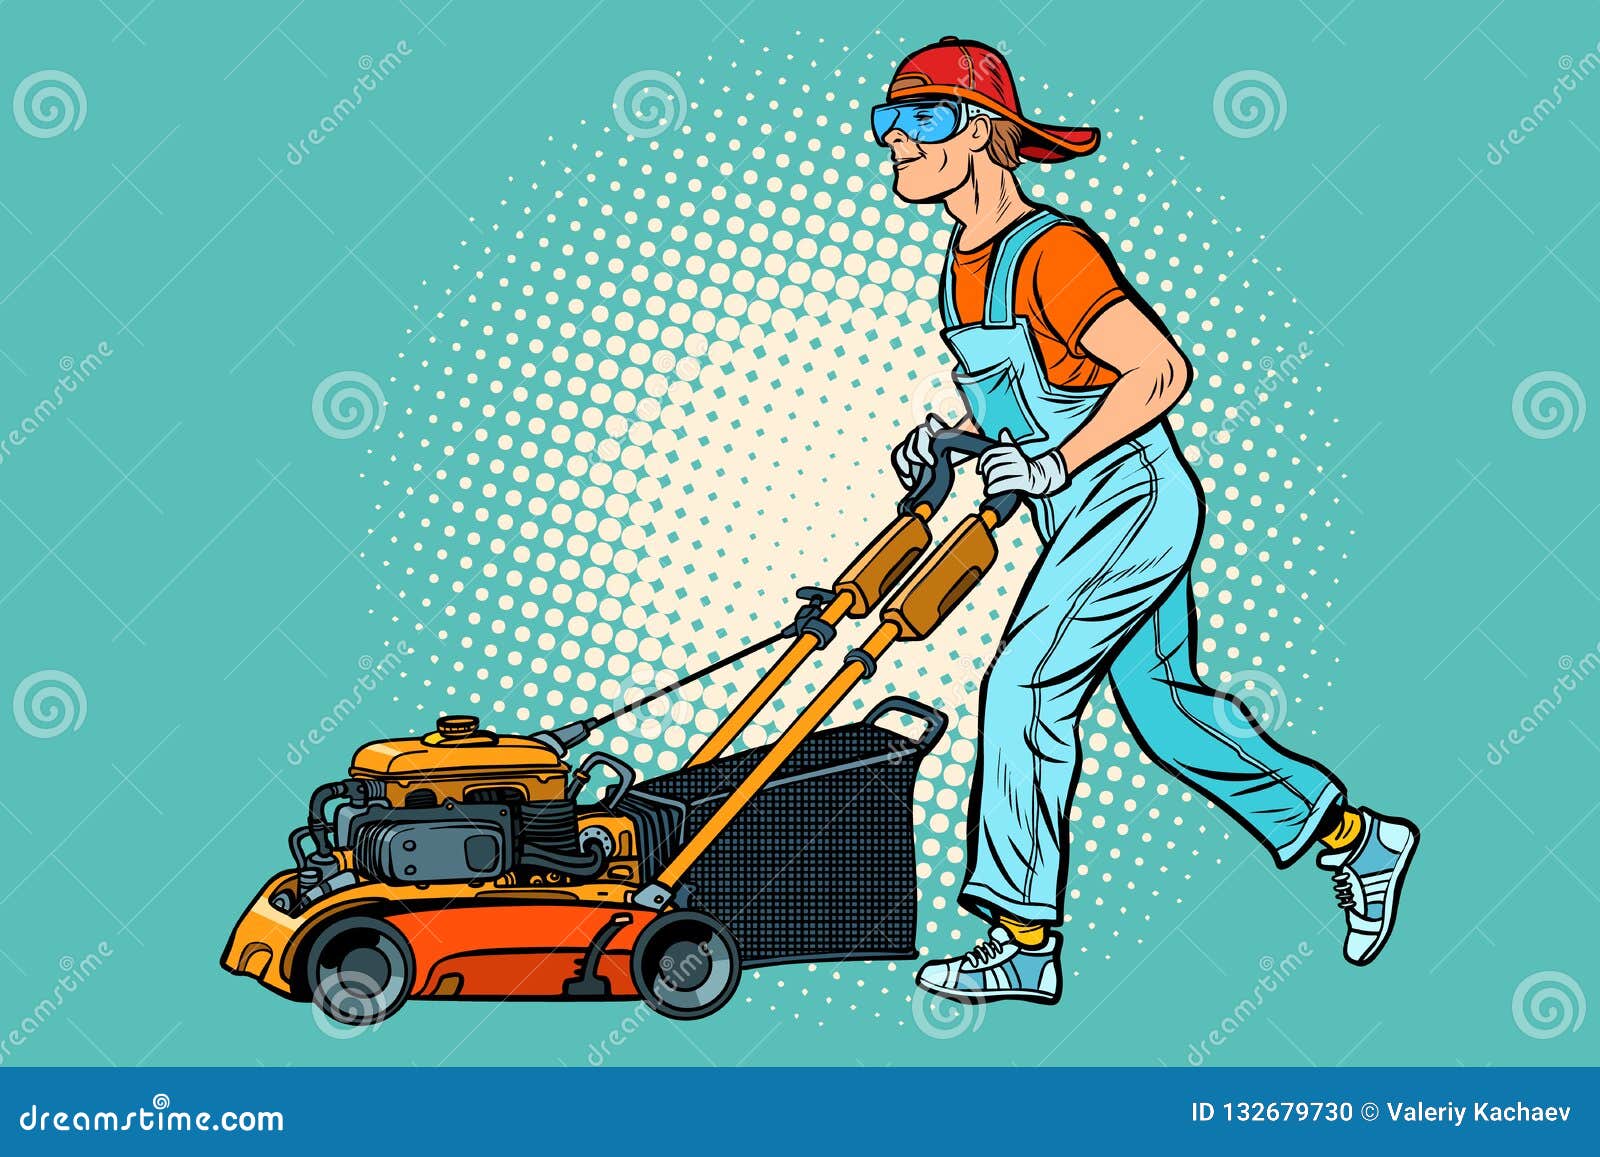 Lawn Mower Worker. Profession And Service Stock Vector